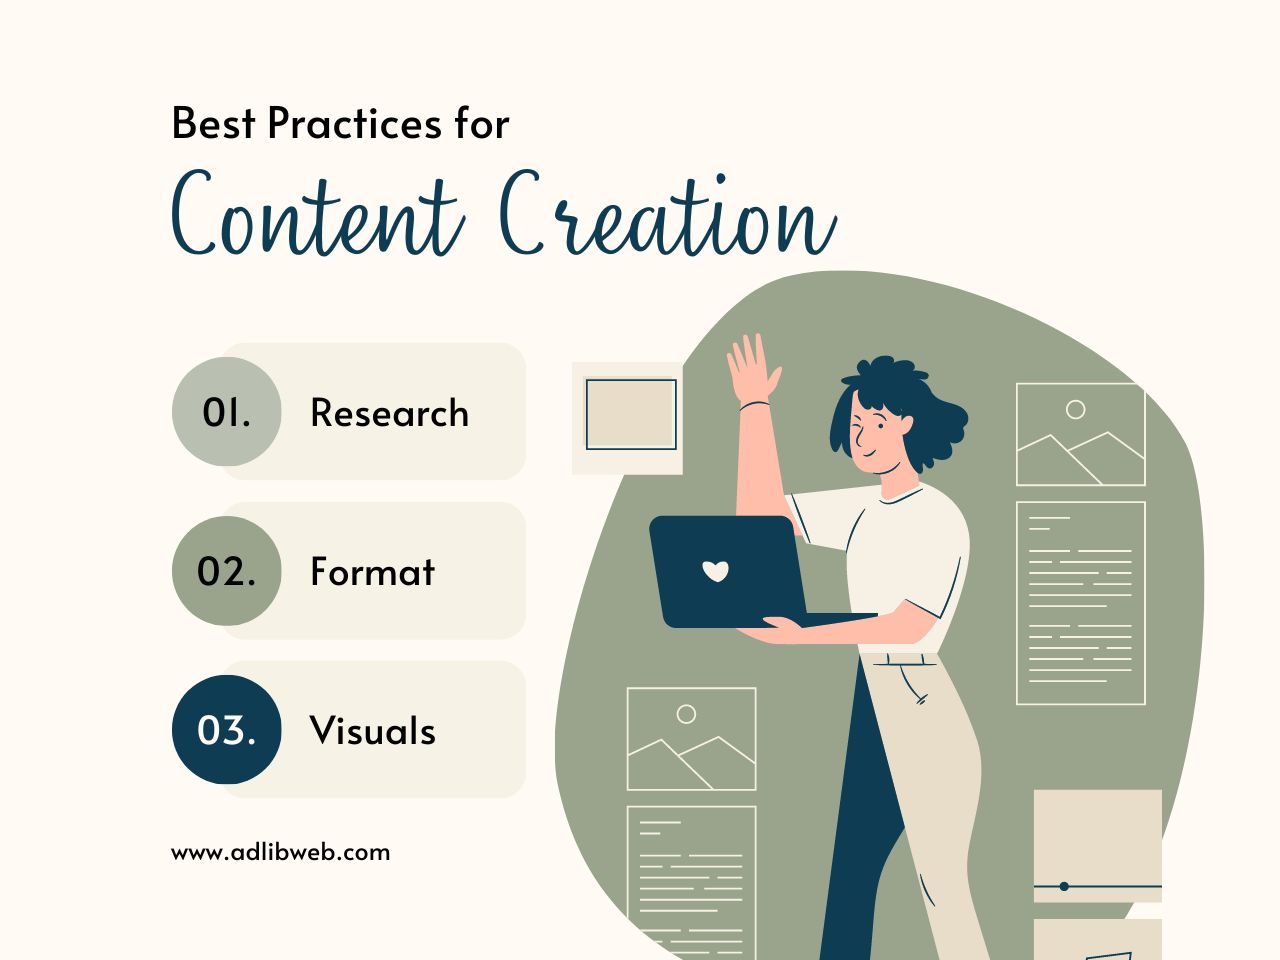 Best Practices for Content Creation